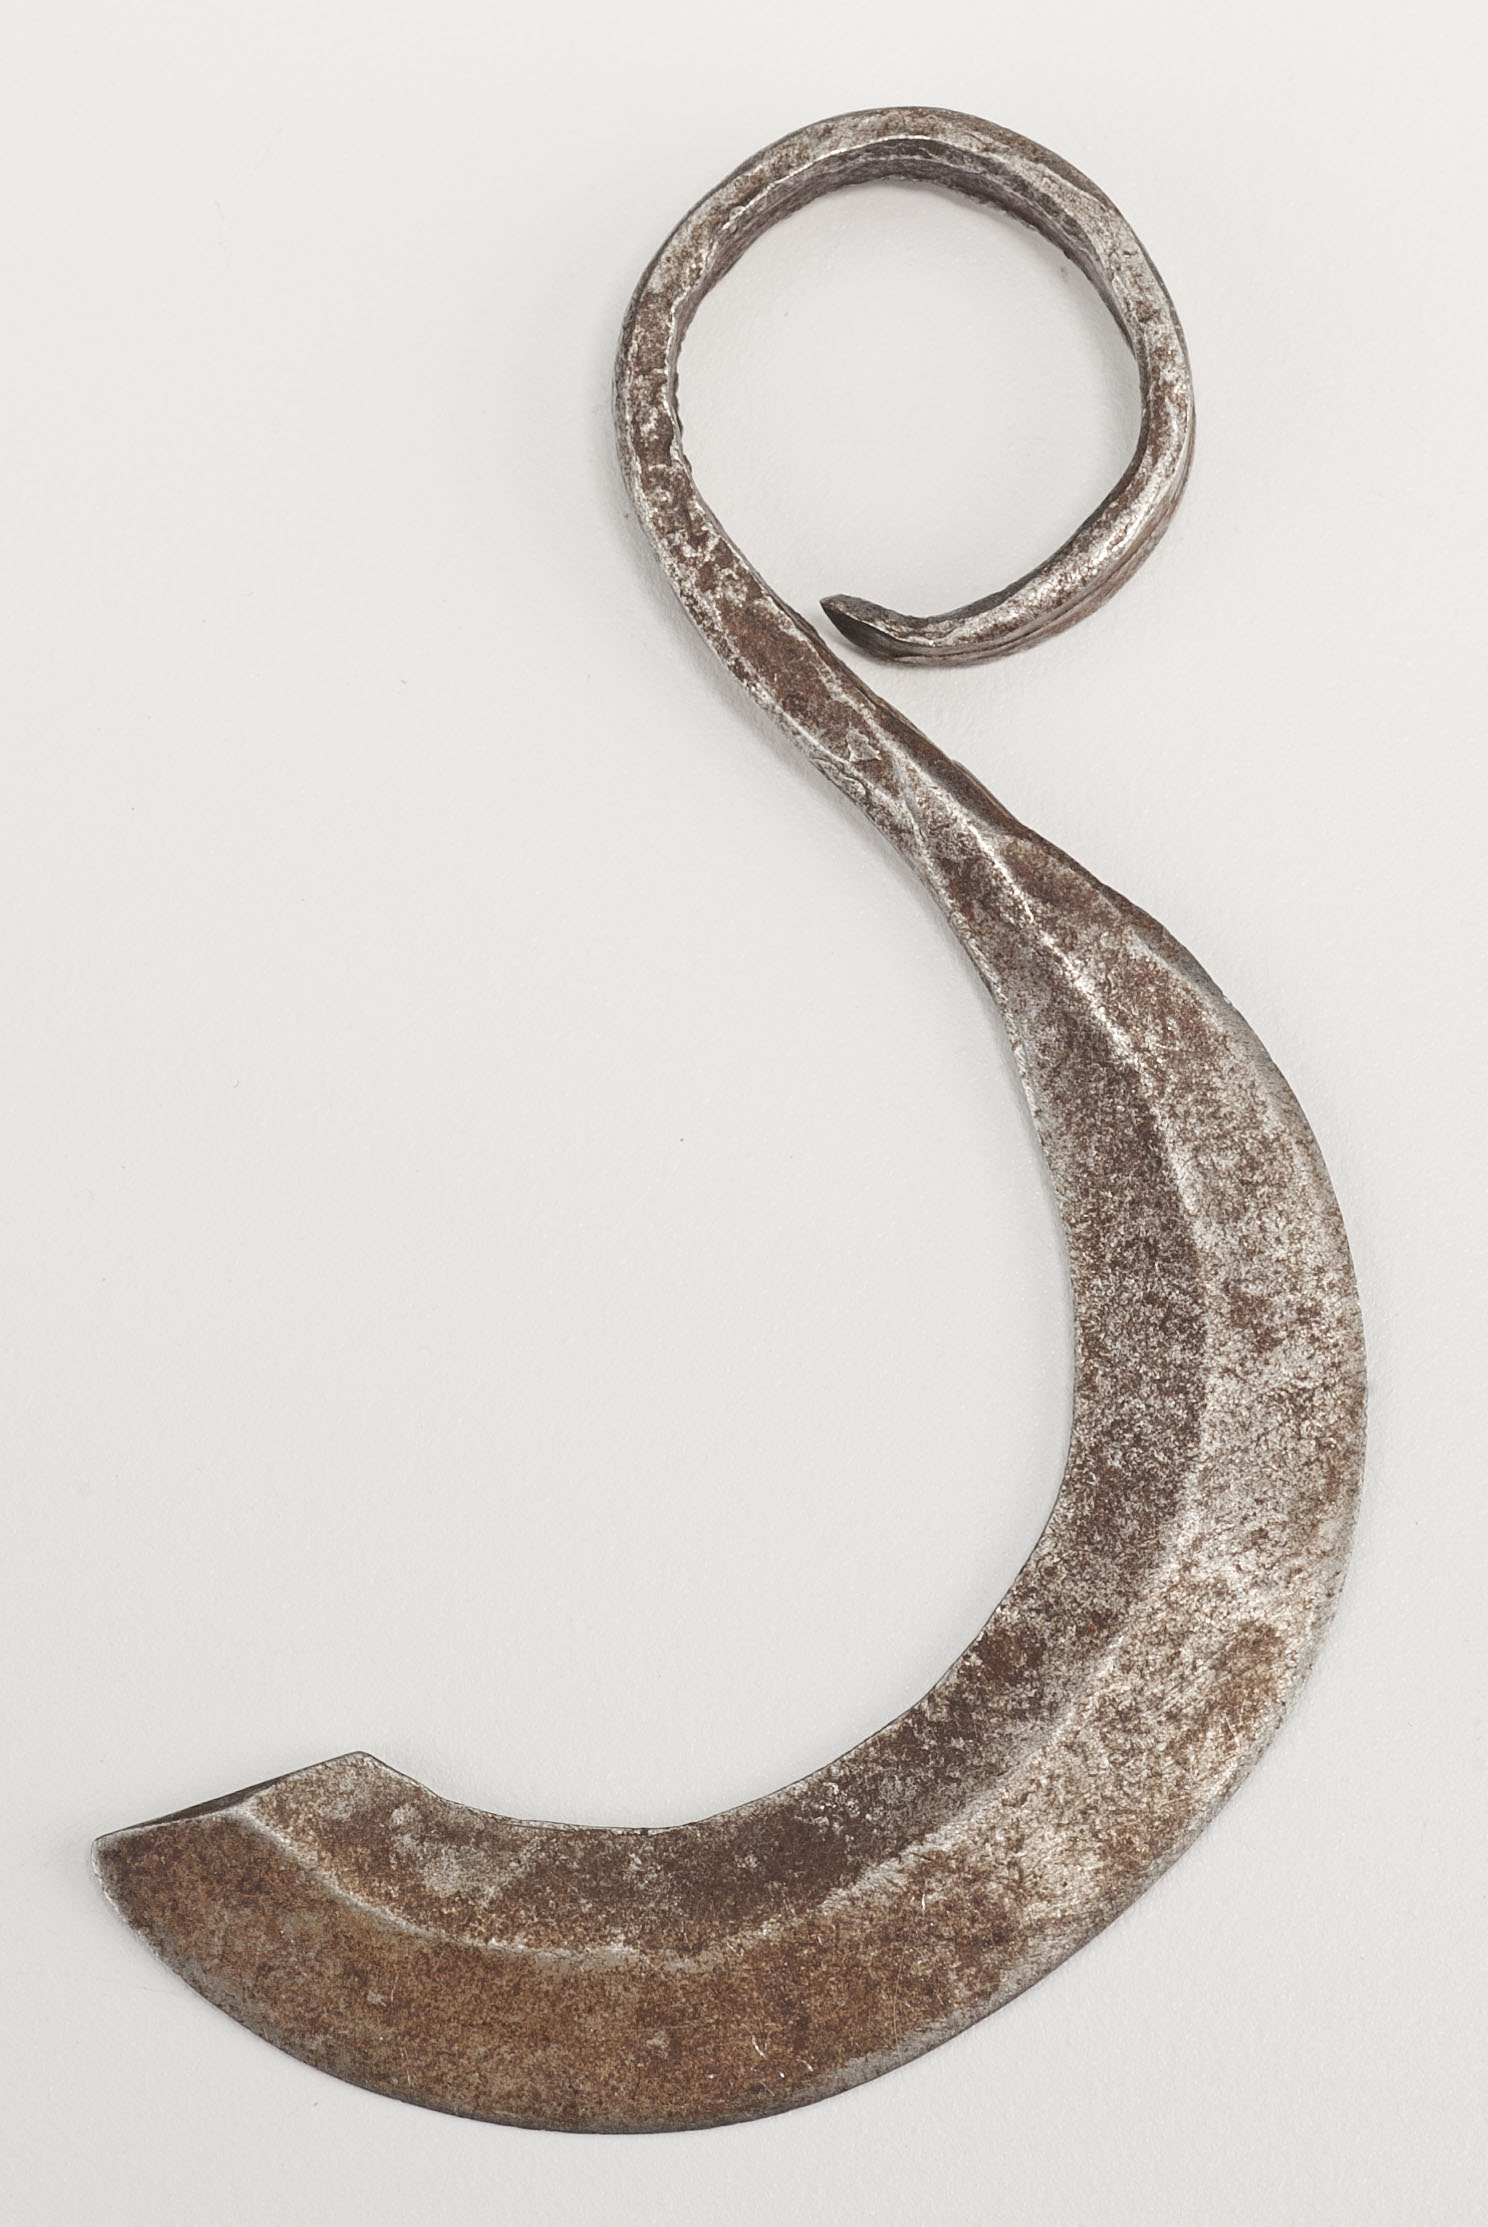 Finger Knife by Unknown Artist - collected near Maralal in 1976 - 8.9 x 8.9 x 4.4 cm Indiana University Art Museum